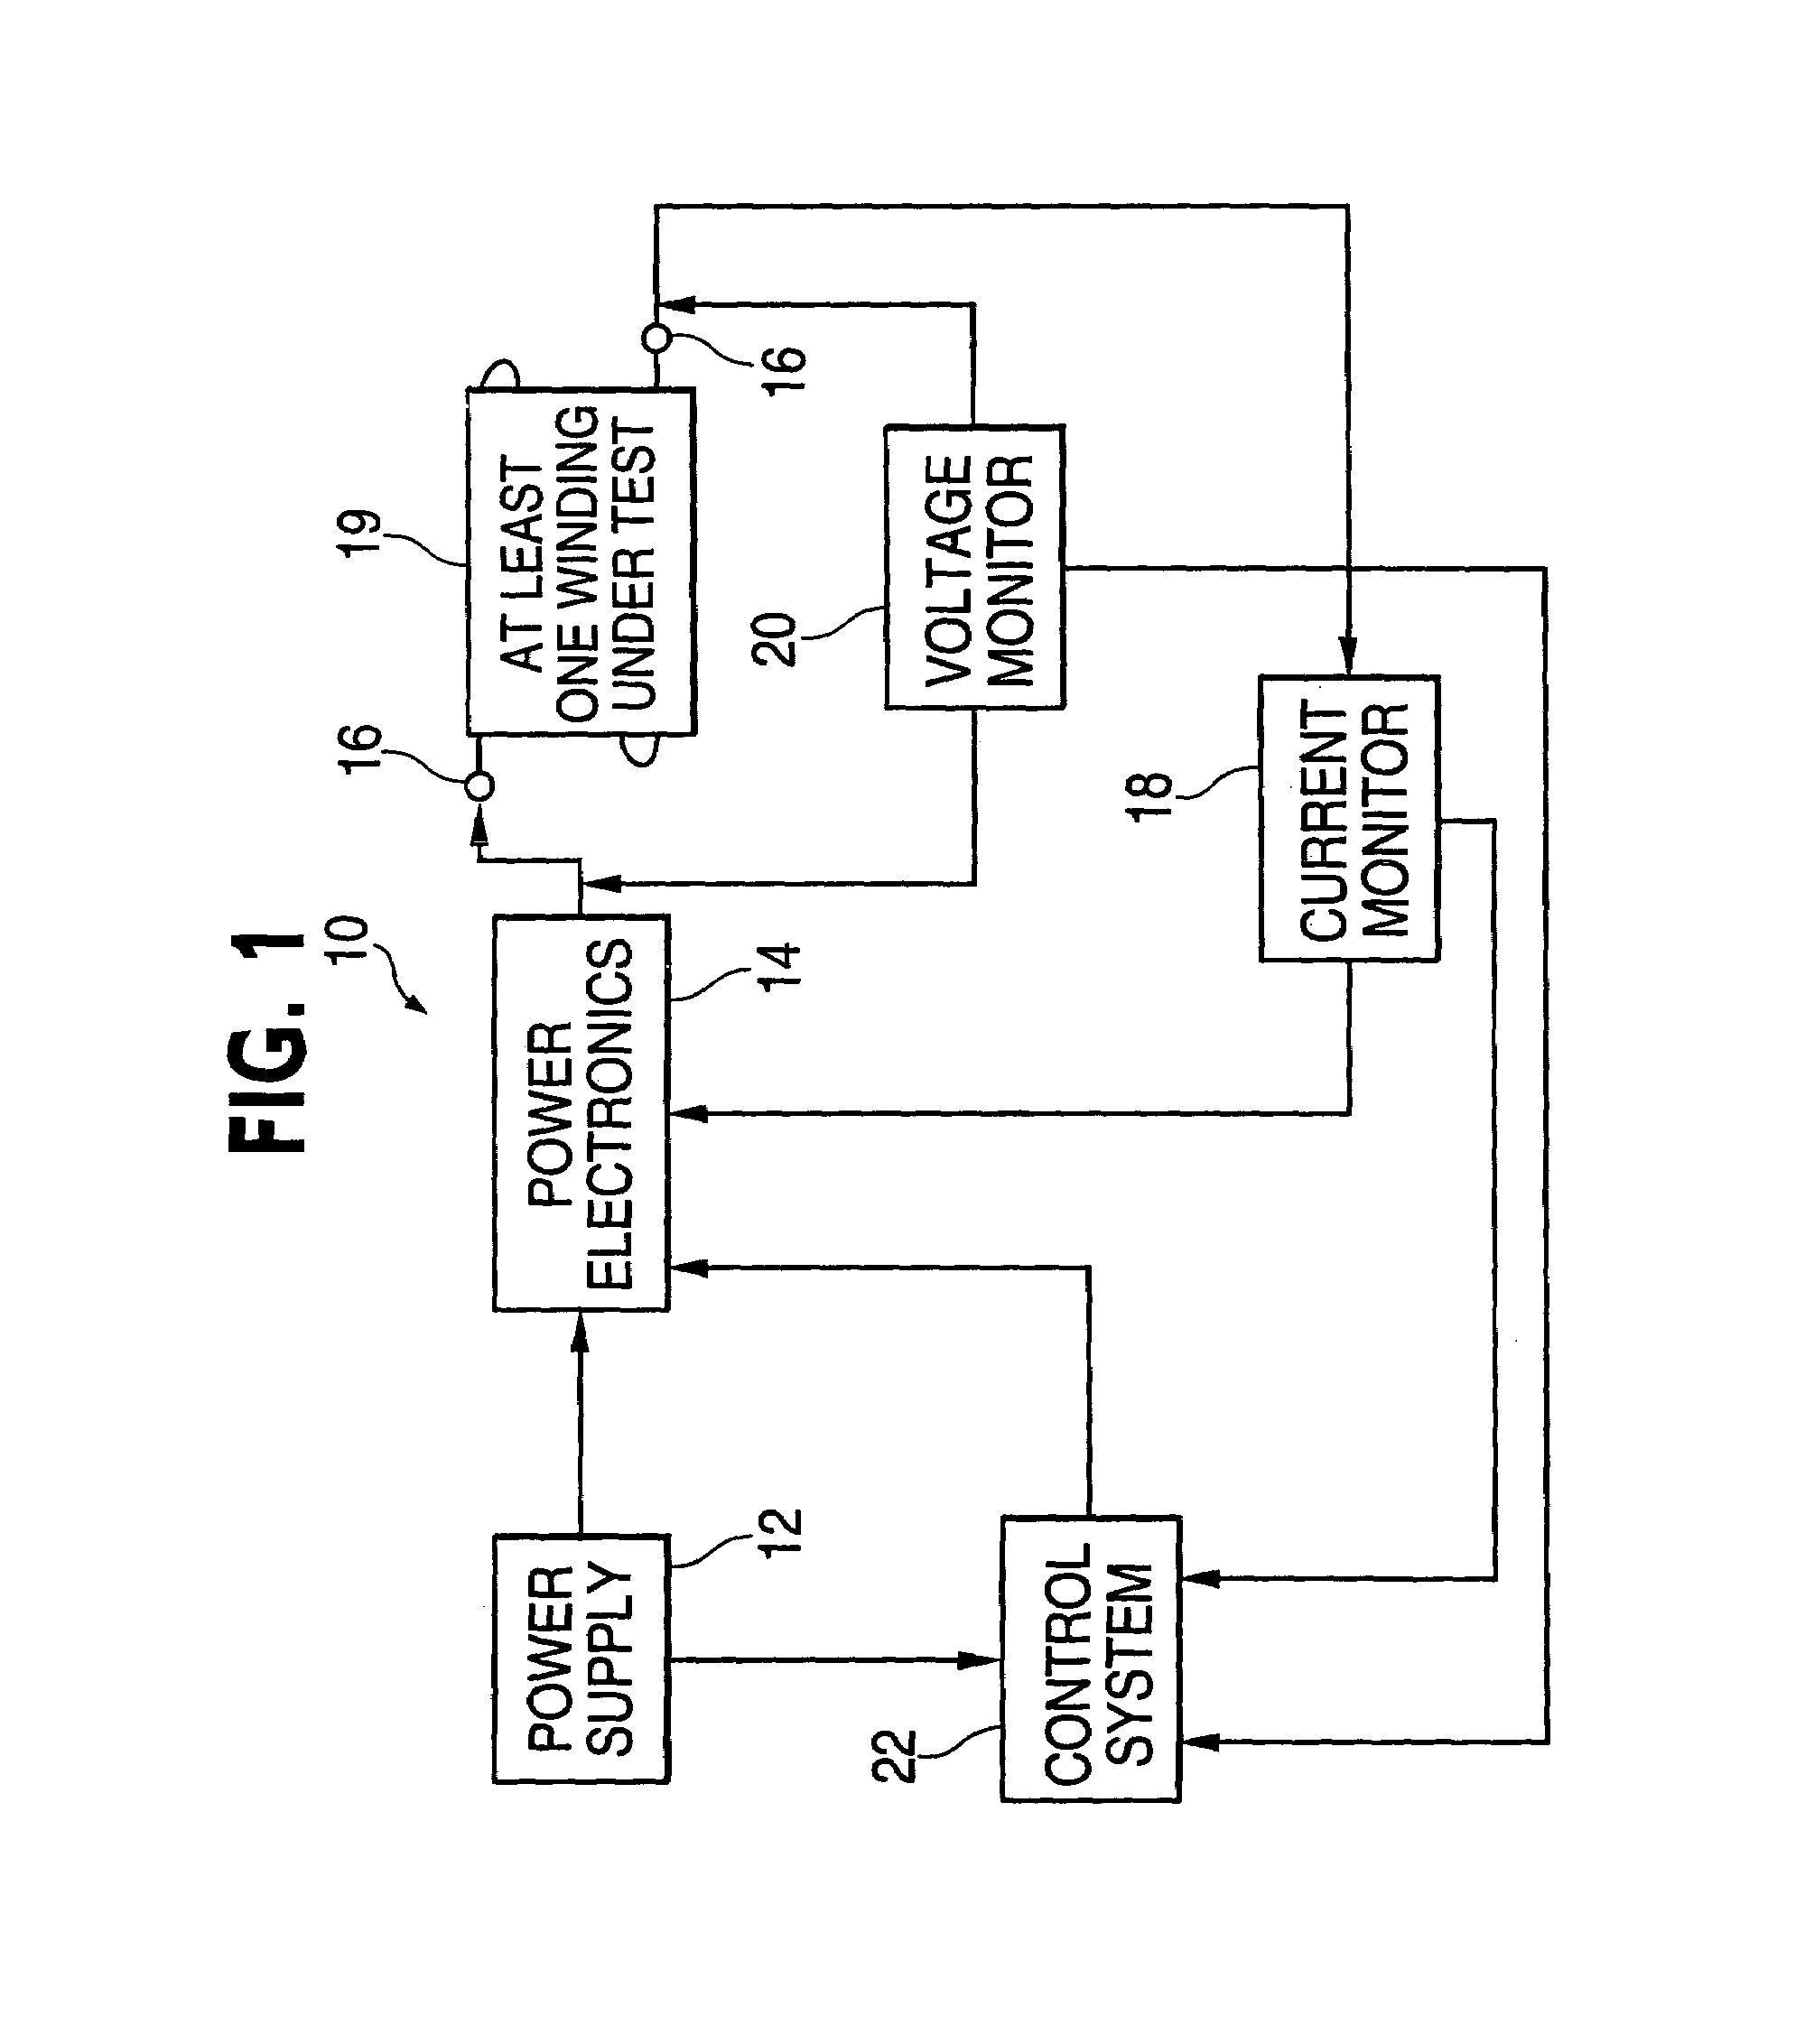 Method and apparatus for measuring transformer winding resistance